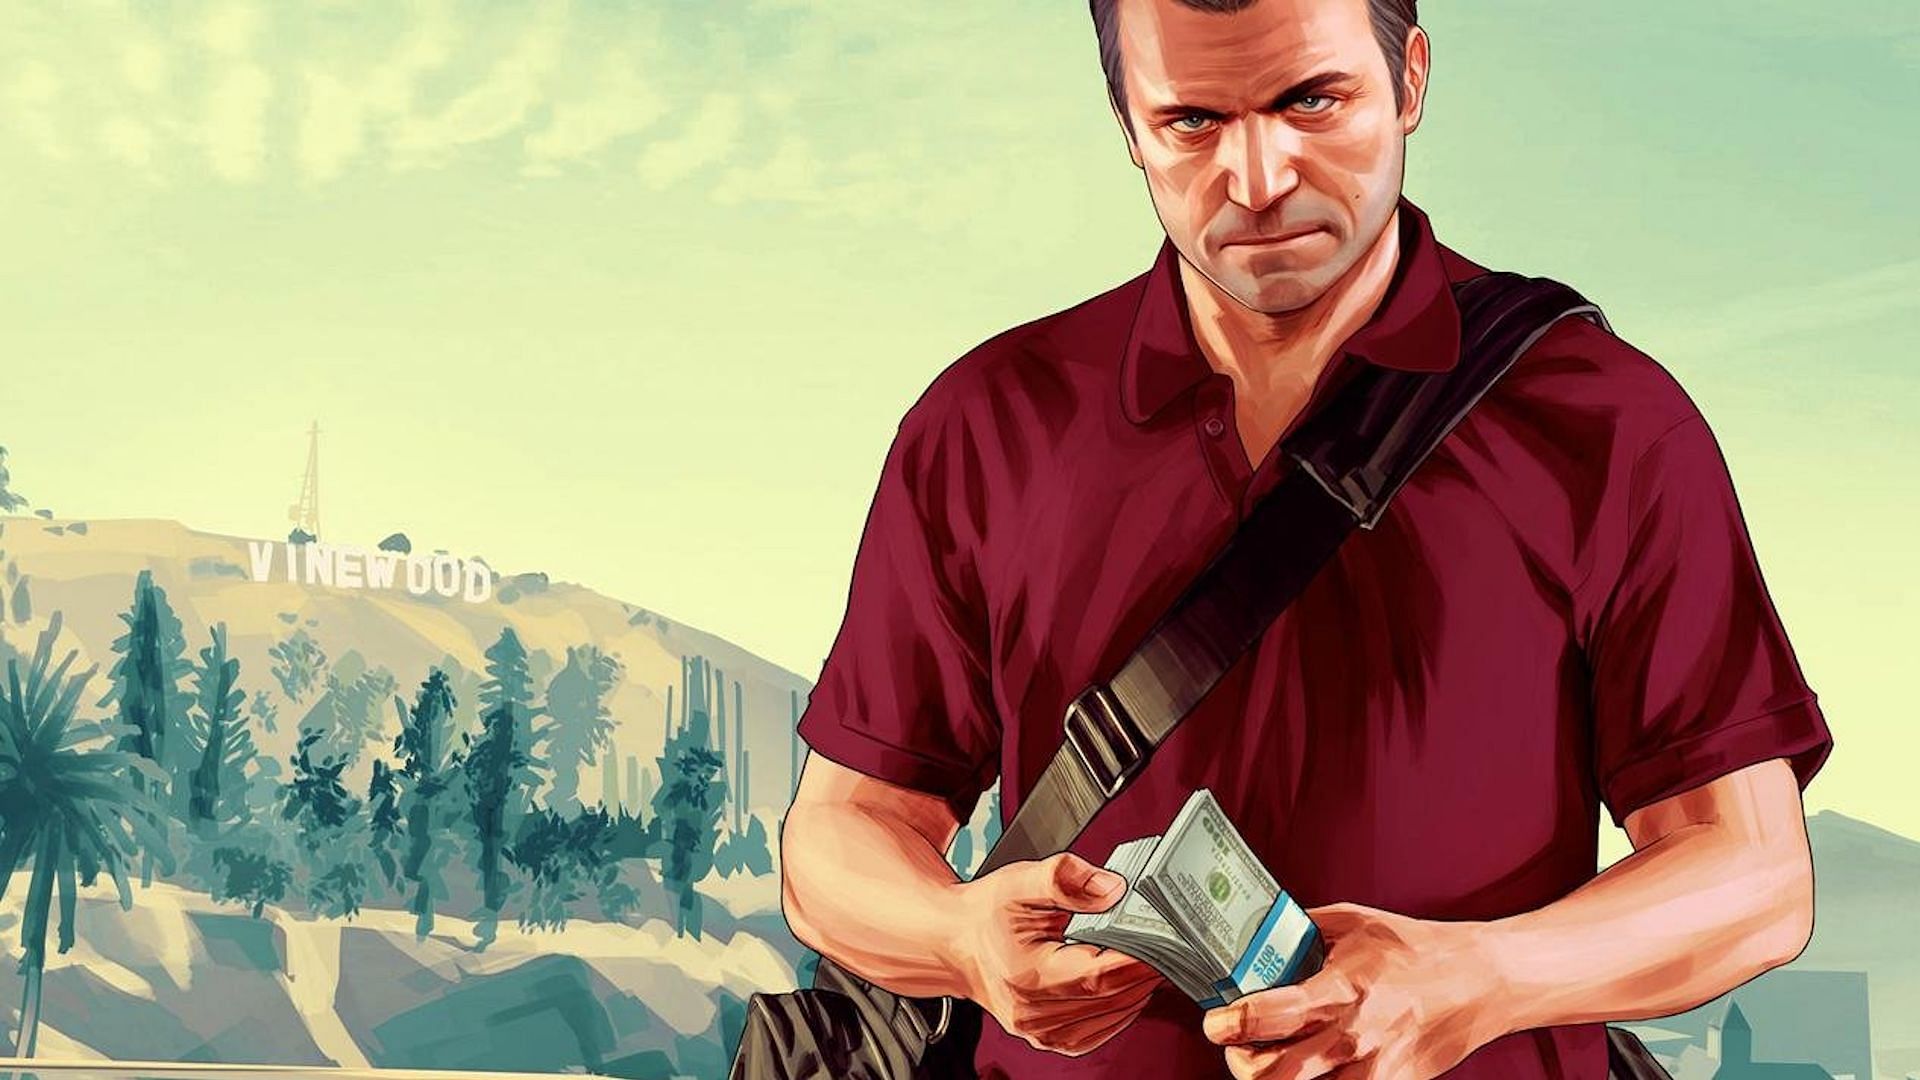 It is only likely that the next Grand Theft Auto game will include a way for Rockstar and Take-Two to make more money